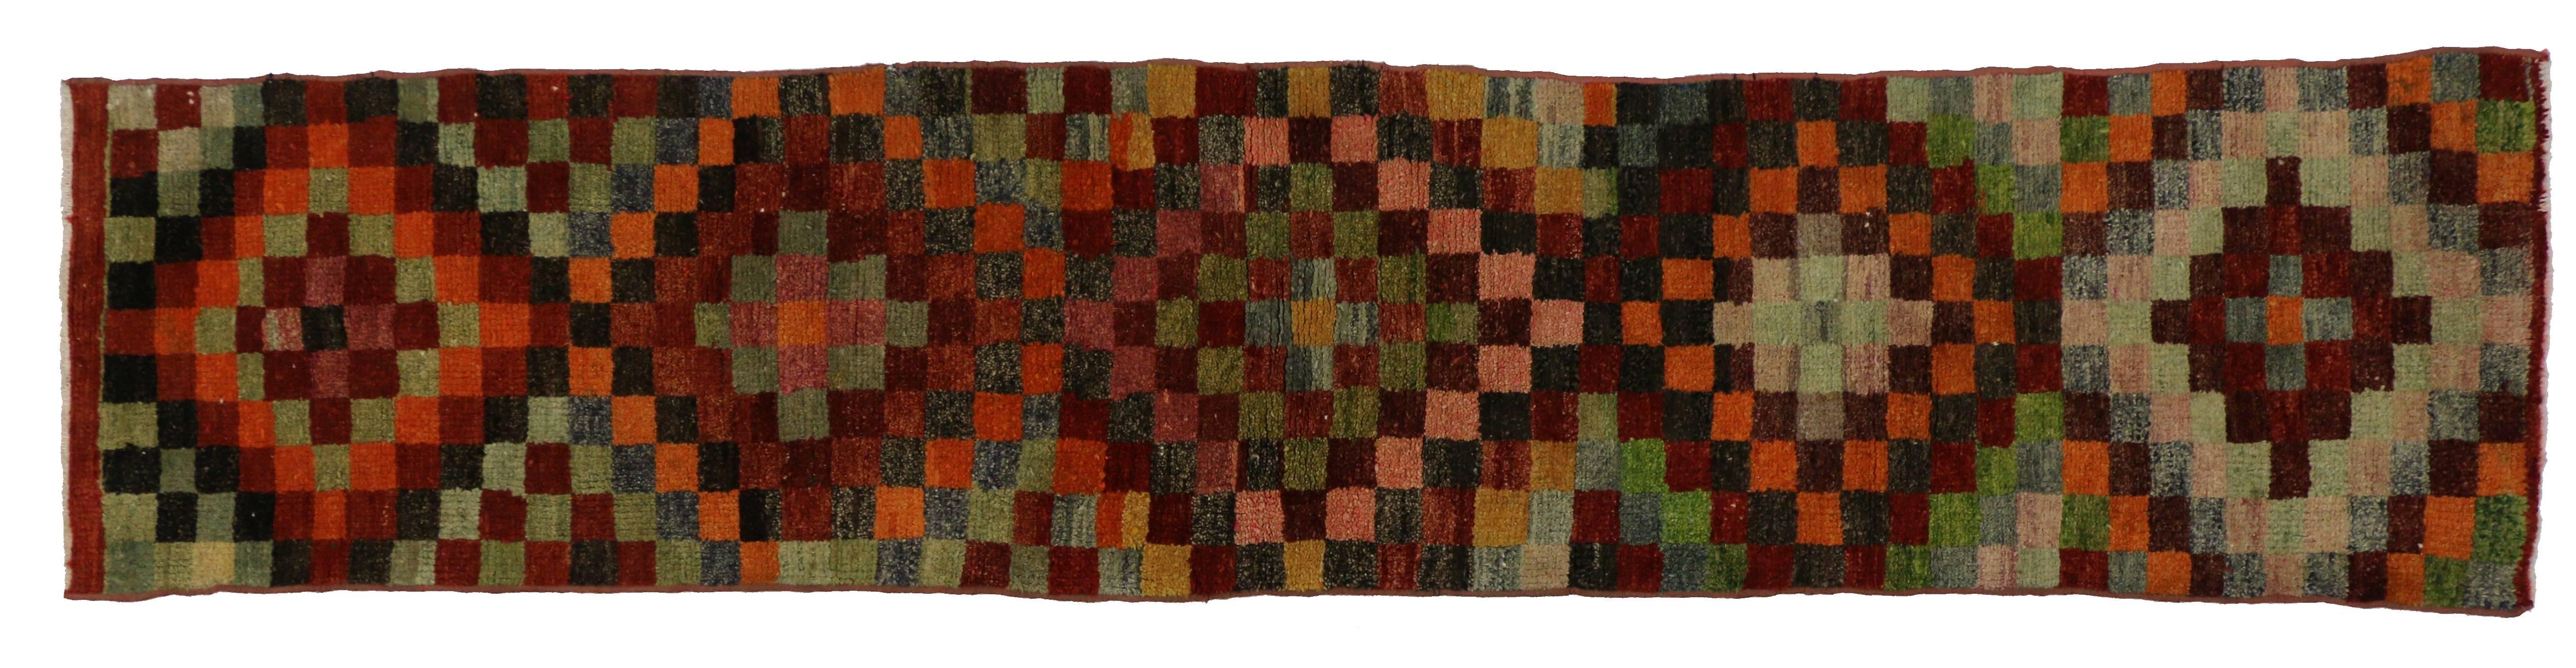 20th Century Vintage Turkish Oushak Runner with Checker Pattern and Bauhaus Cubism Style